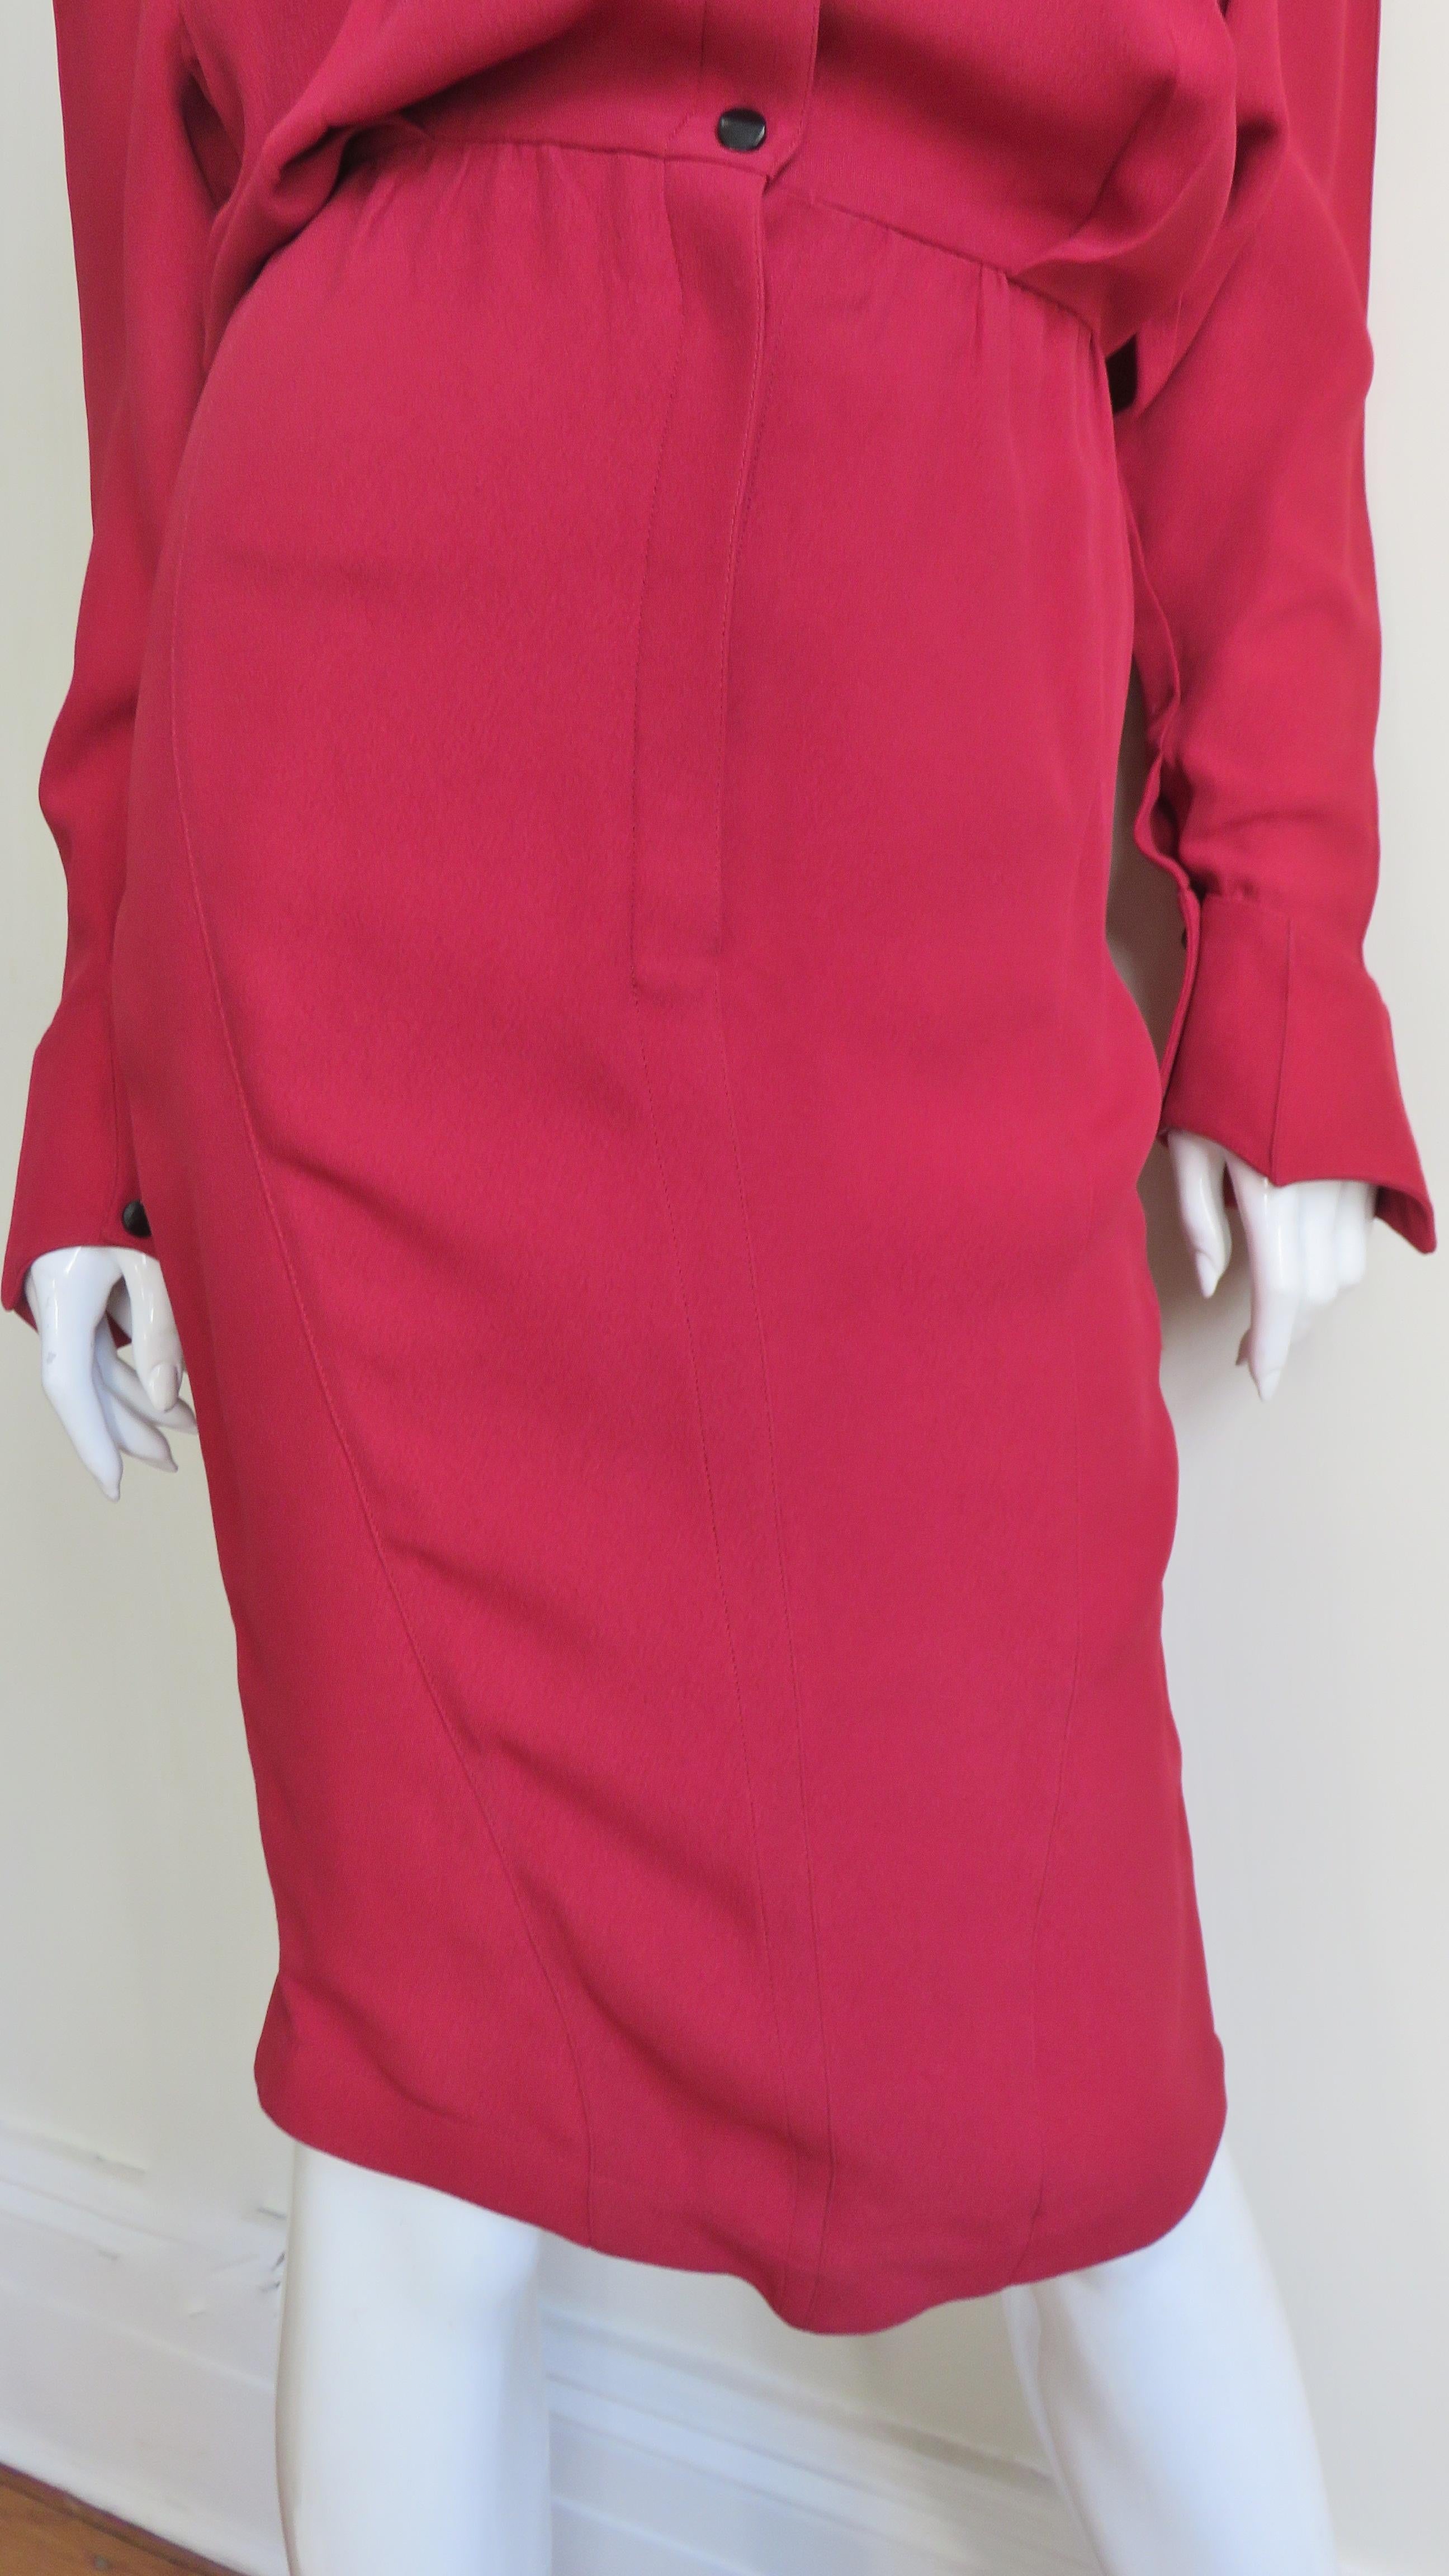 Thierry Mugler Dress with Pointed Collar and Cuffs 1980s For Sale 1